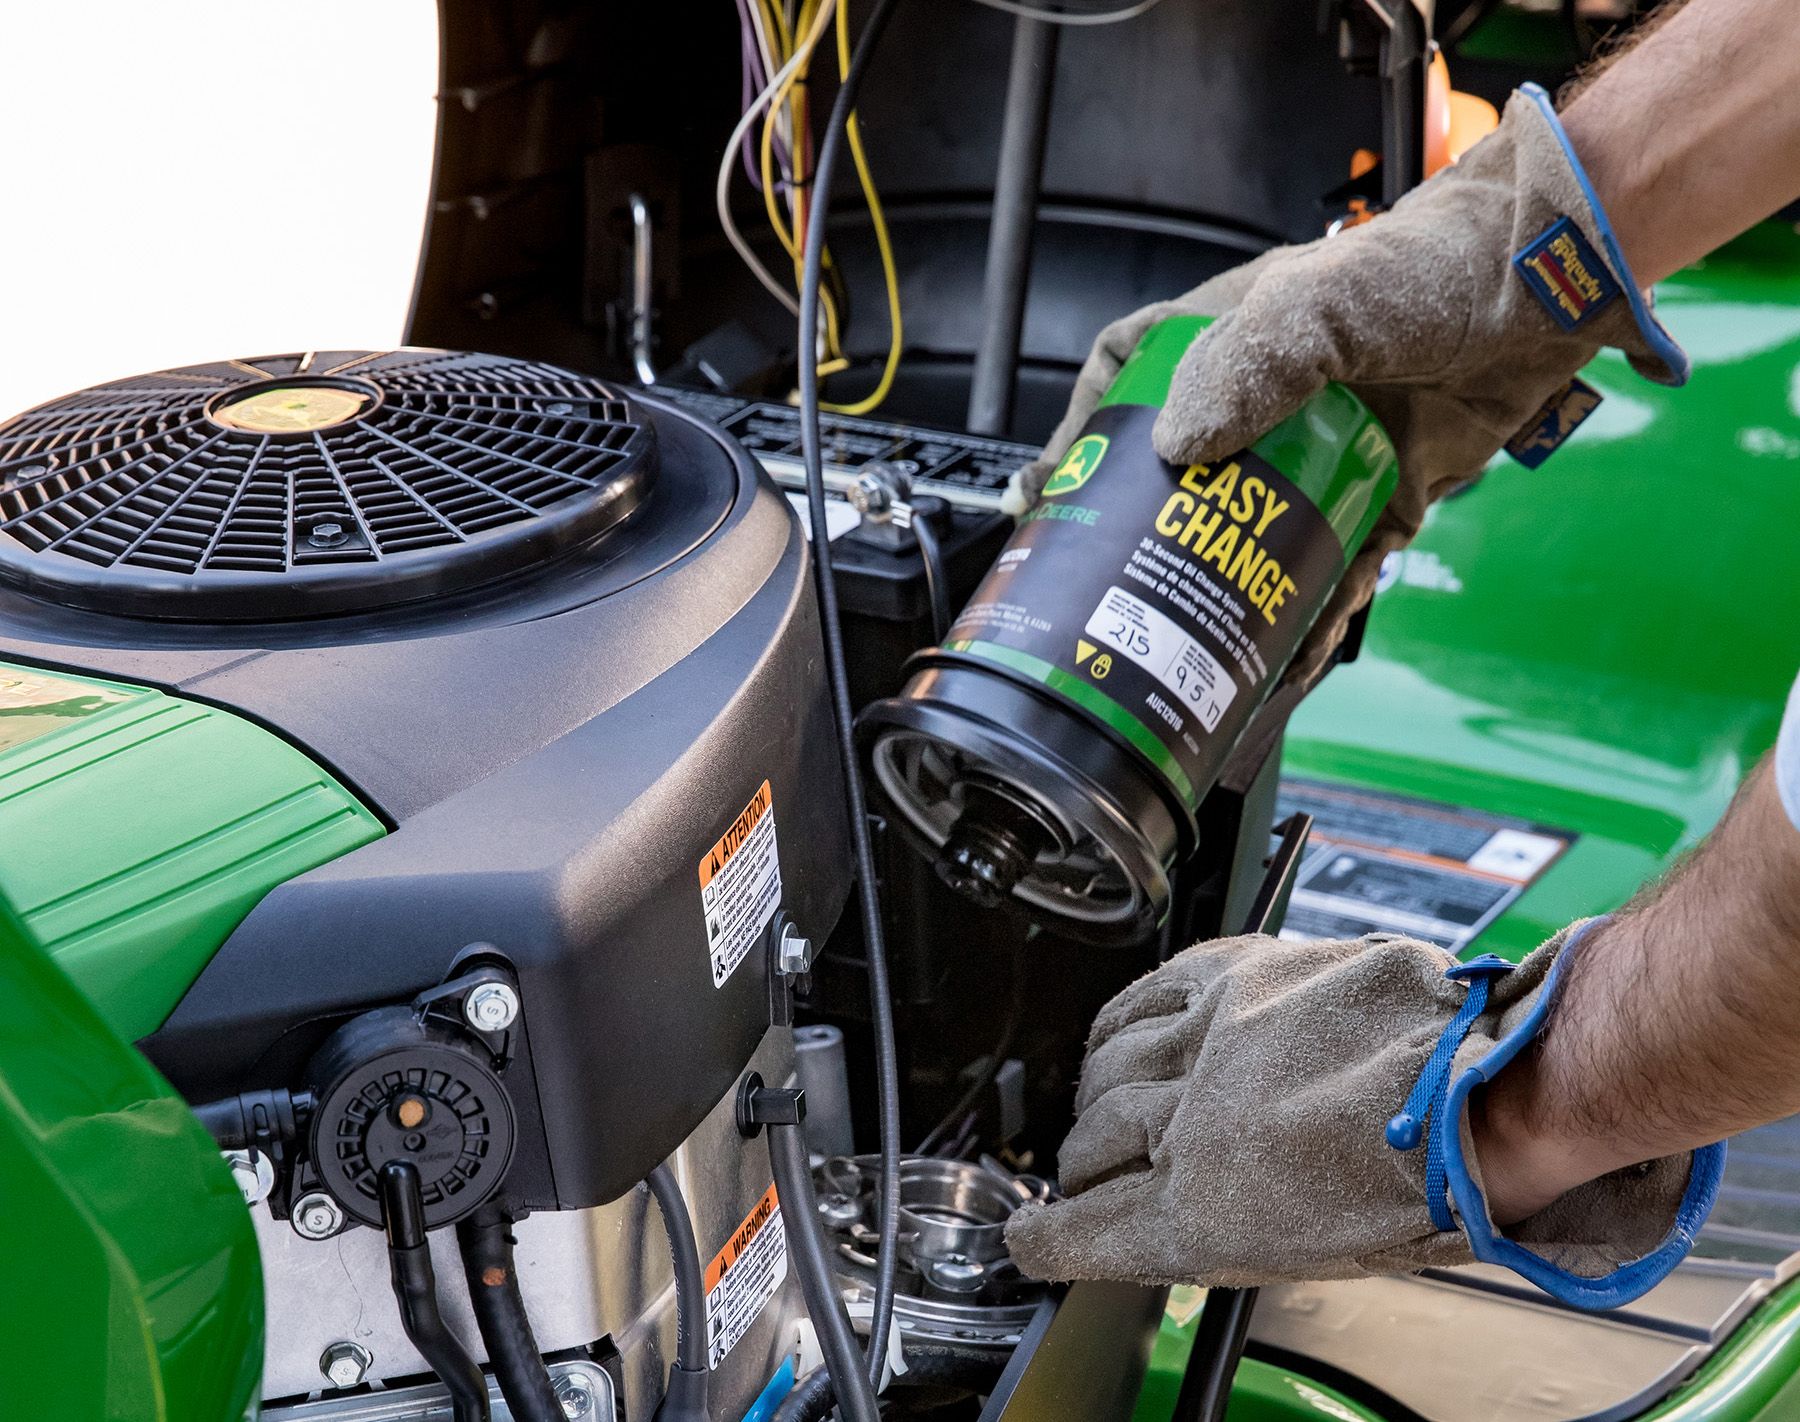 Troubleshooting Issues with John Deere’s 30-Second Oil Change System